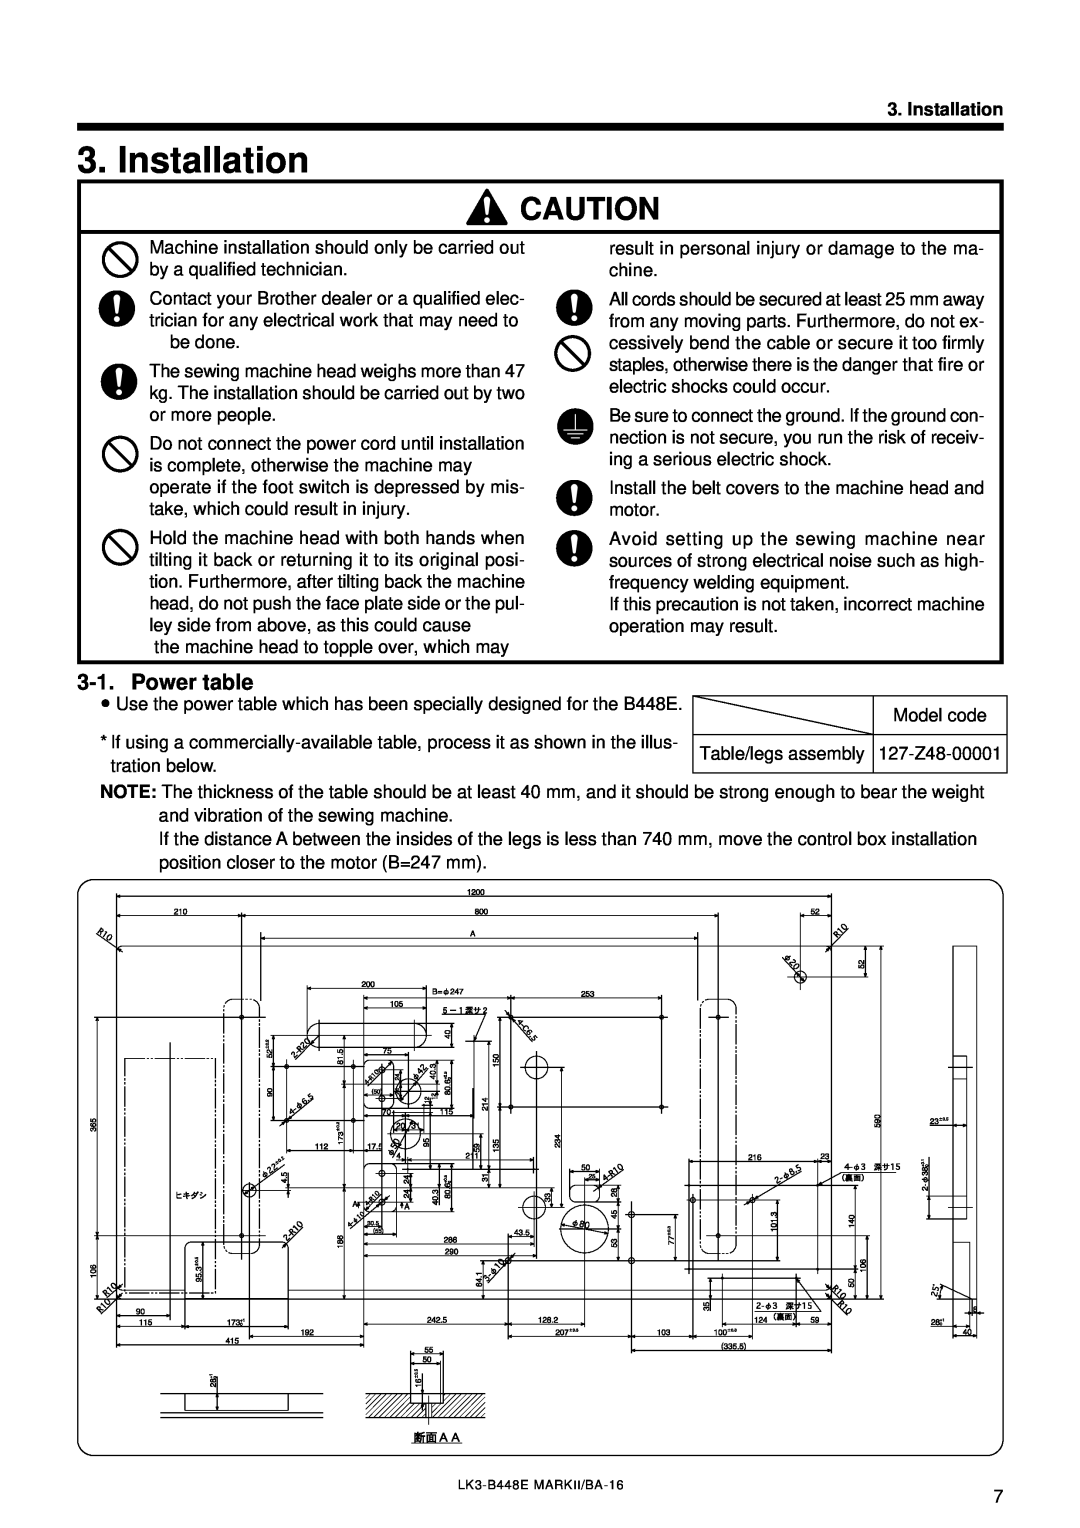 Brother LK3-B448E instruction manual Installation, Power table 